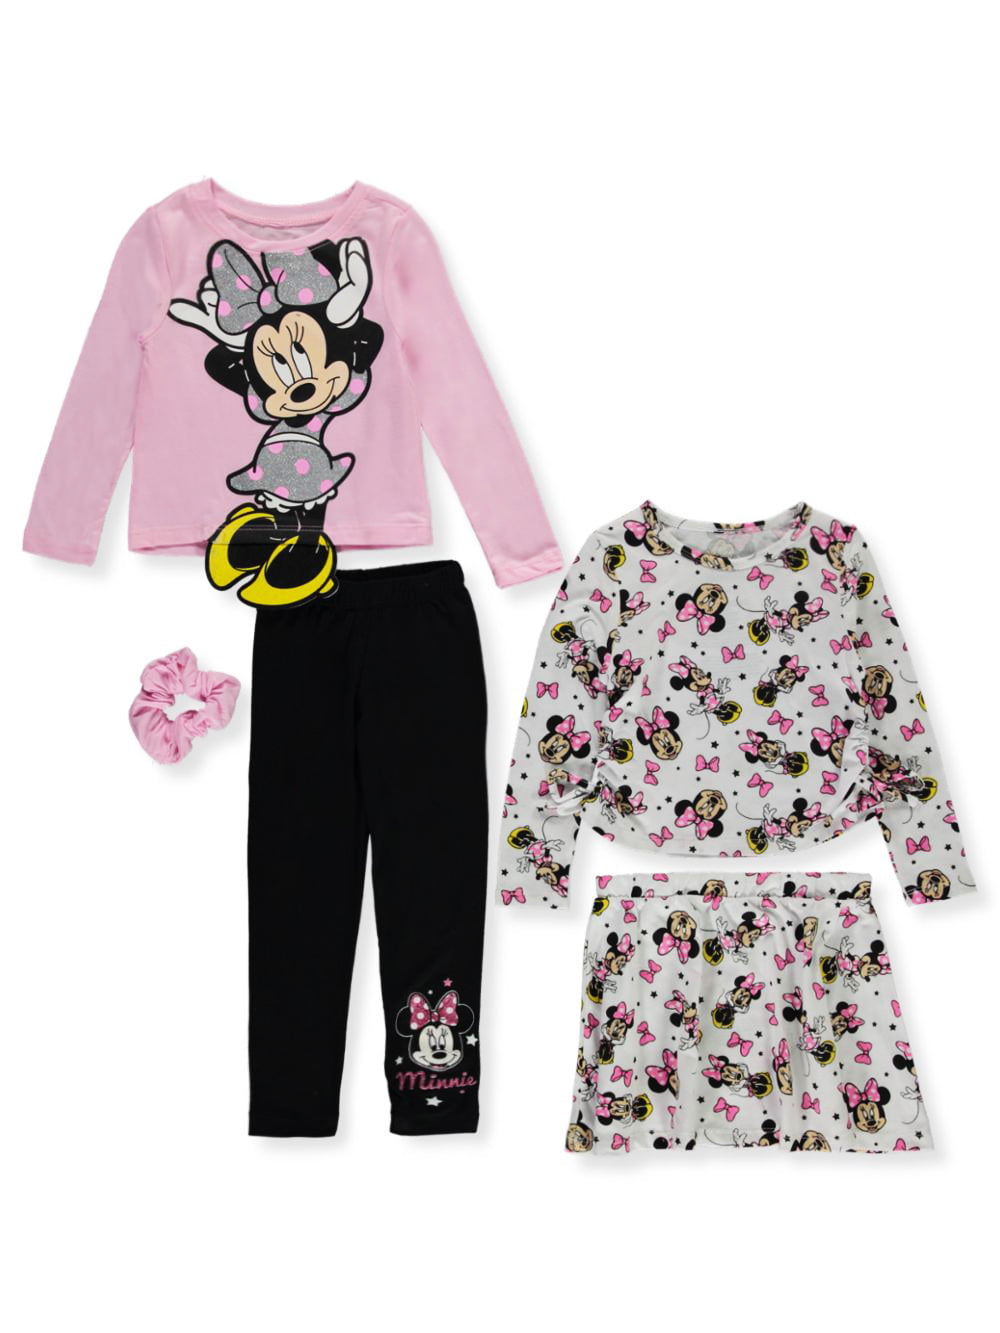 NEW GIRLS DISNEY BLUE & PINK MINNIE MOUSE  PJYAMAS SIZE 12-18,2-3 & 3-4 YEARS 